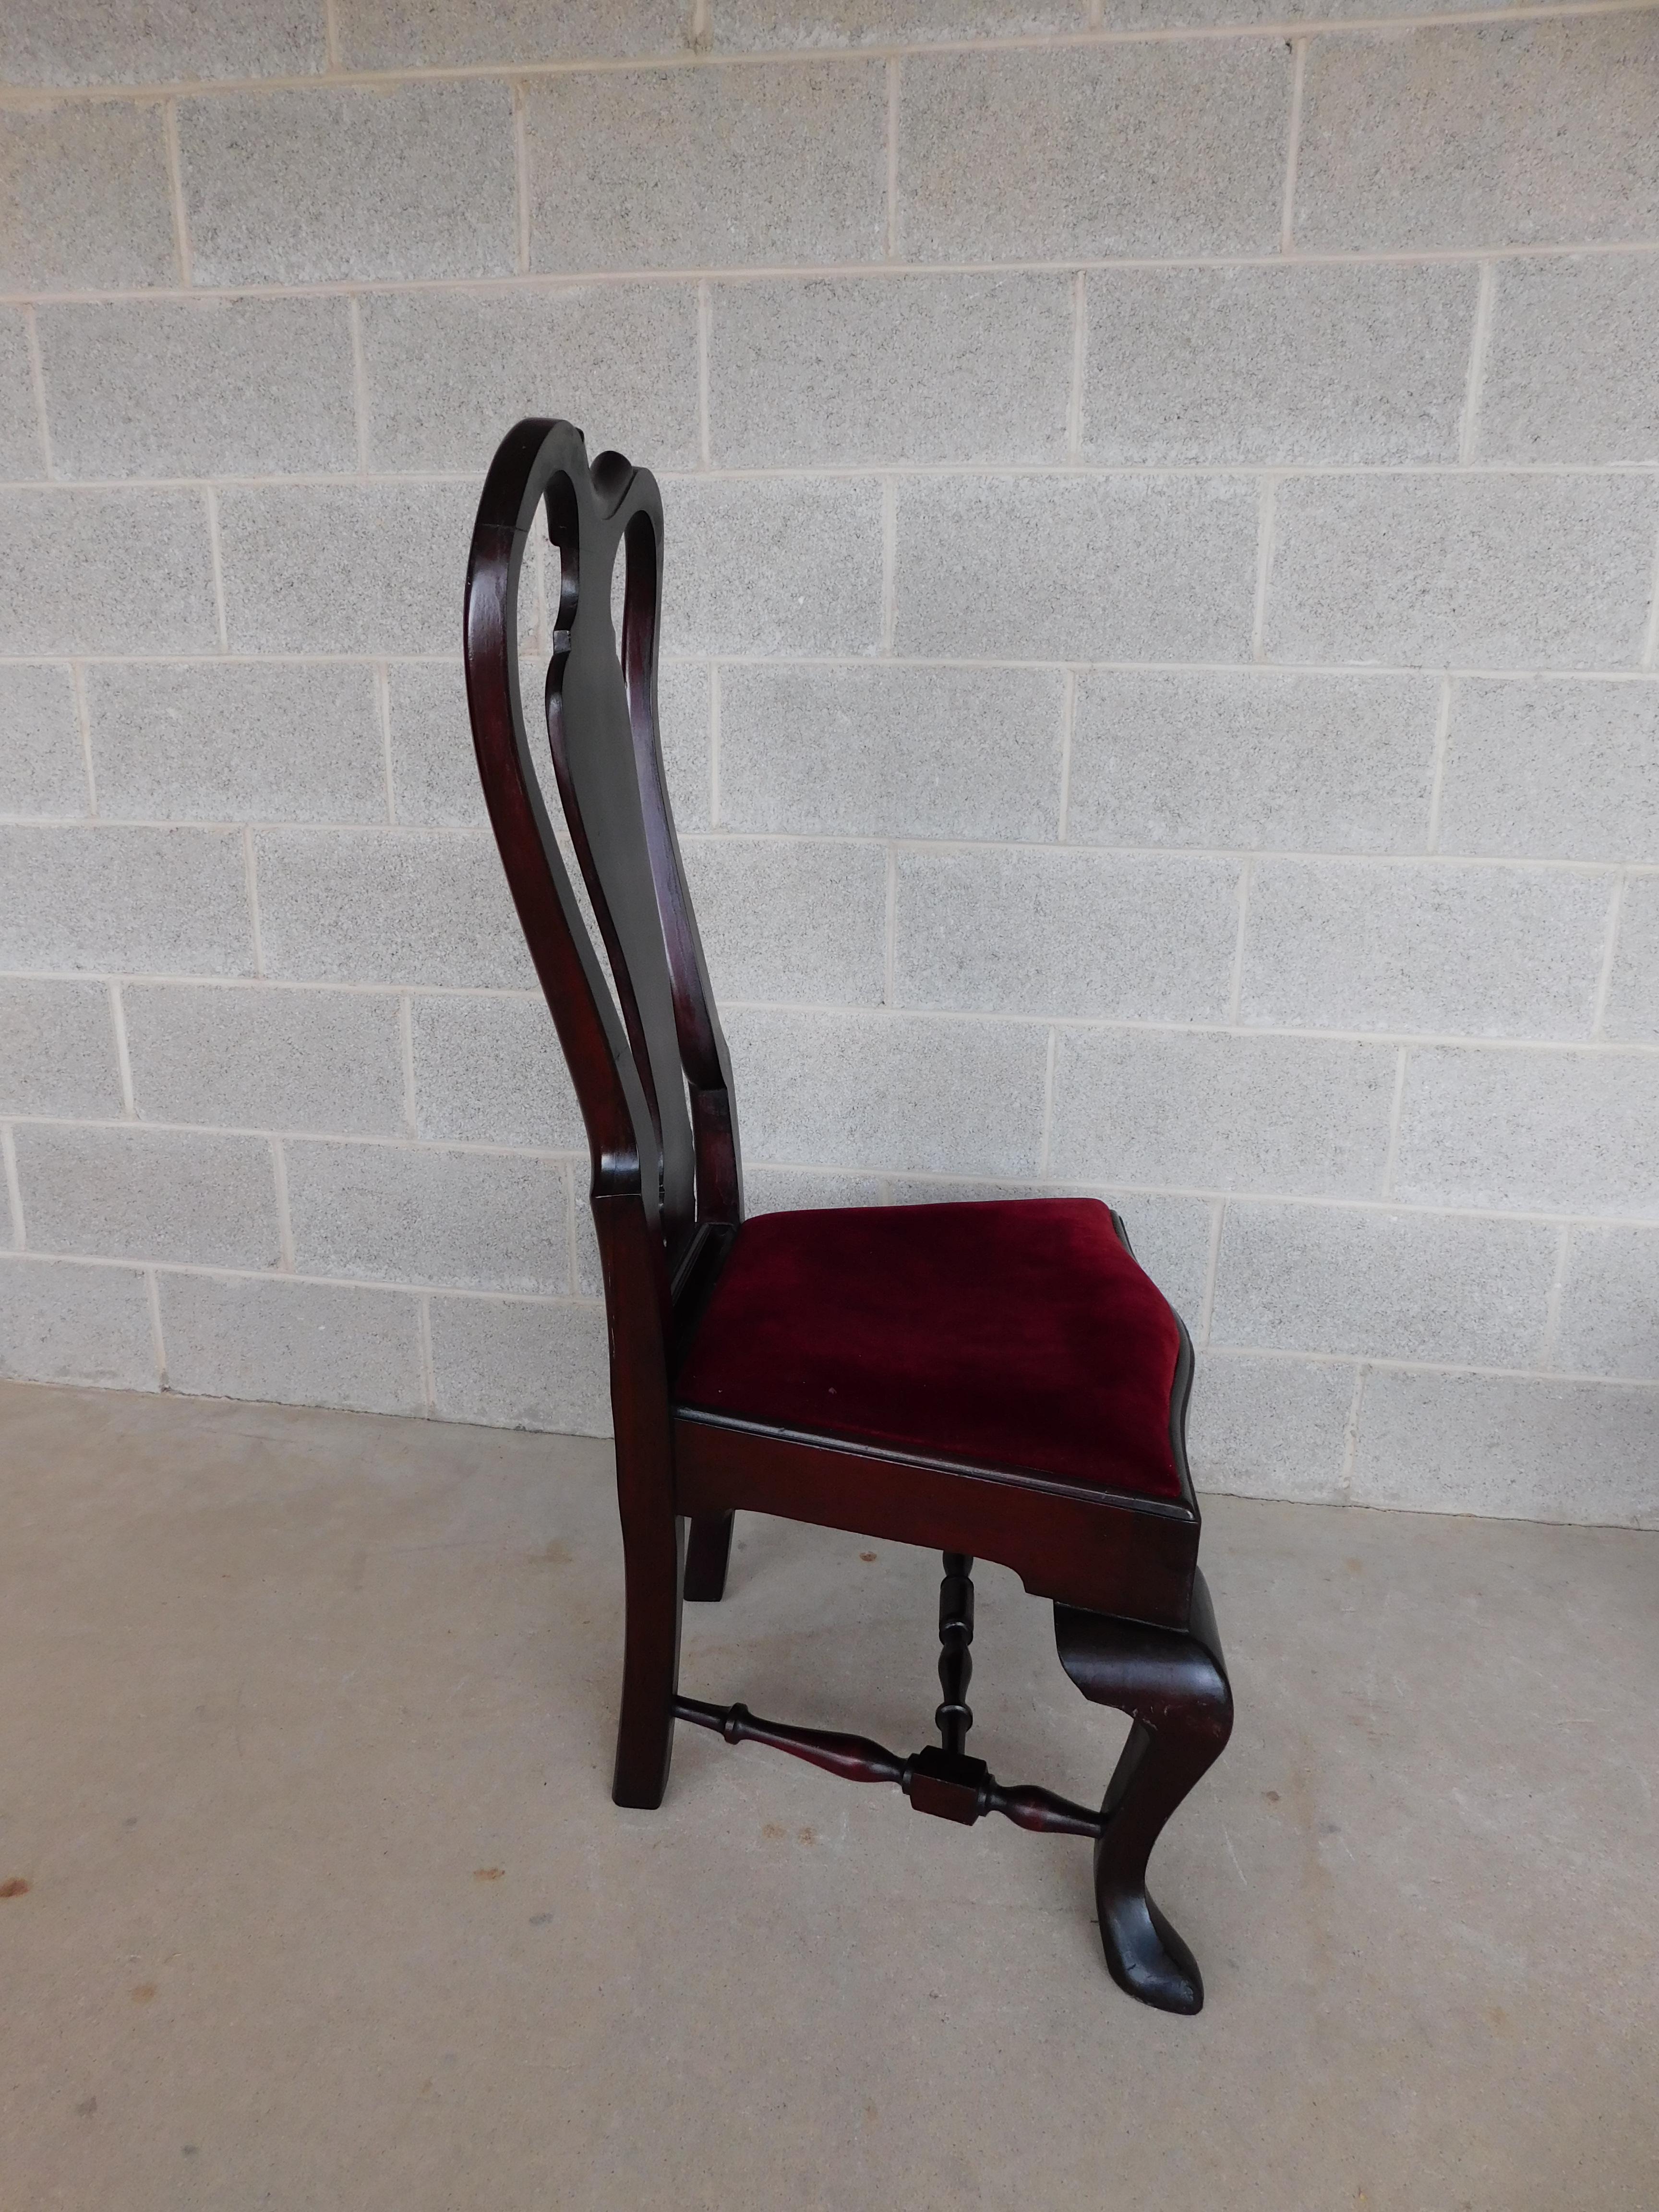 Feldenkreis Mahogany Queen Anne Style Oversize Accent Fireside Chairs - a Pair For Sale 5